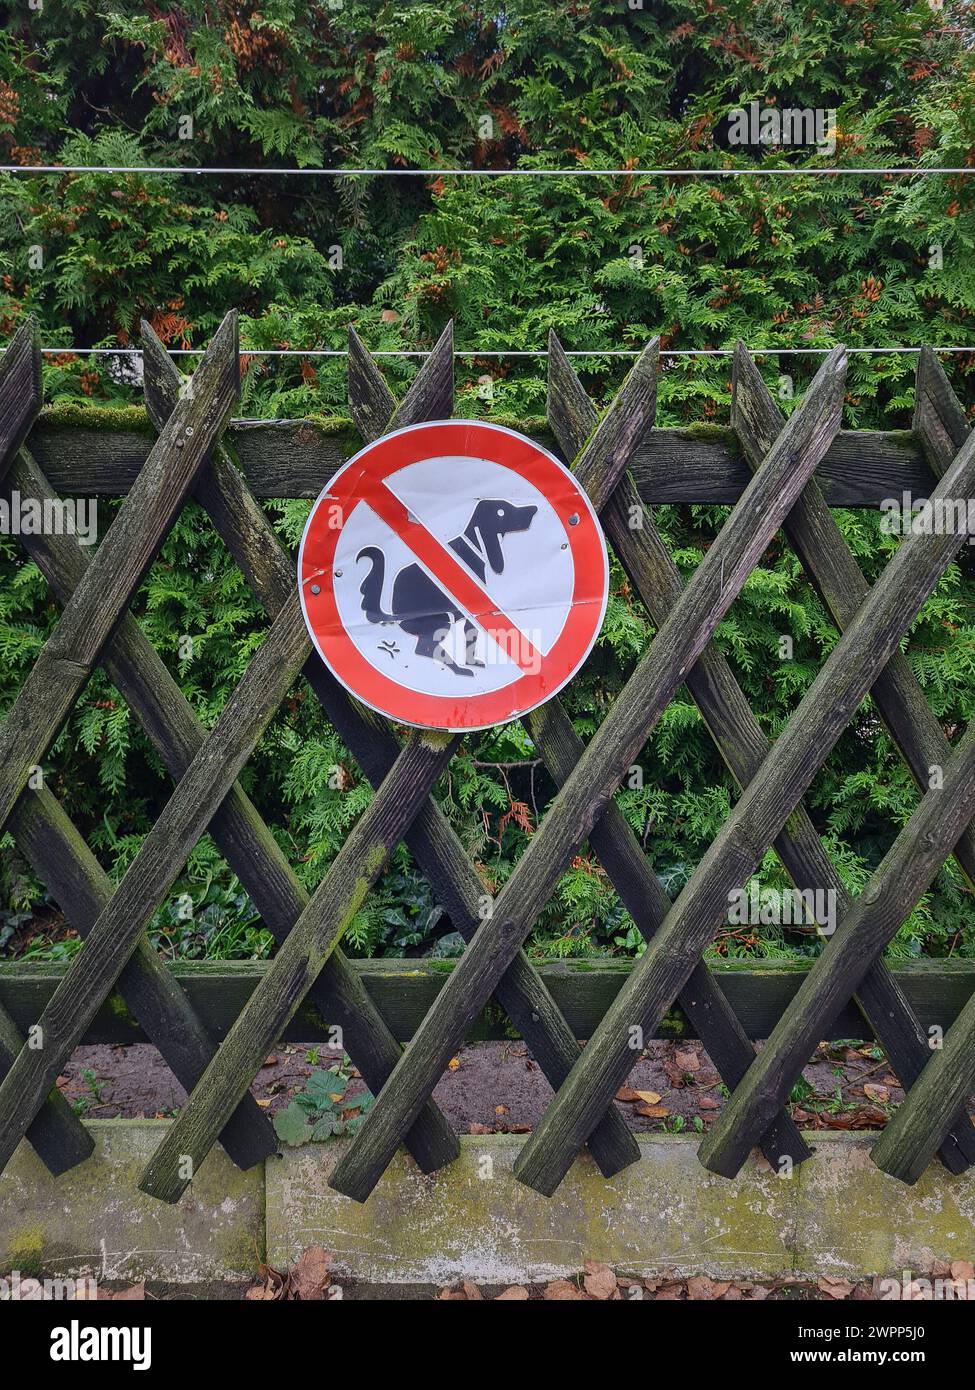 A hunter's fence with a red prohibition sign as a warning and indication against dog excrement Stock Photo